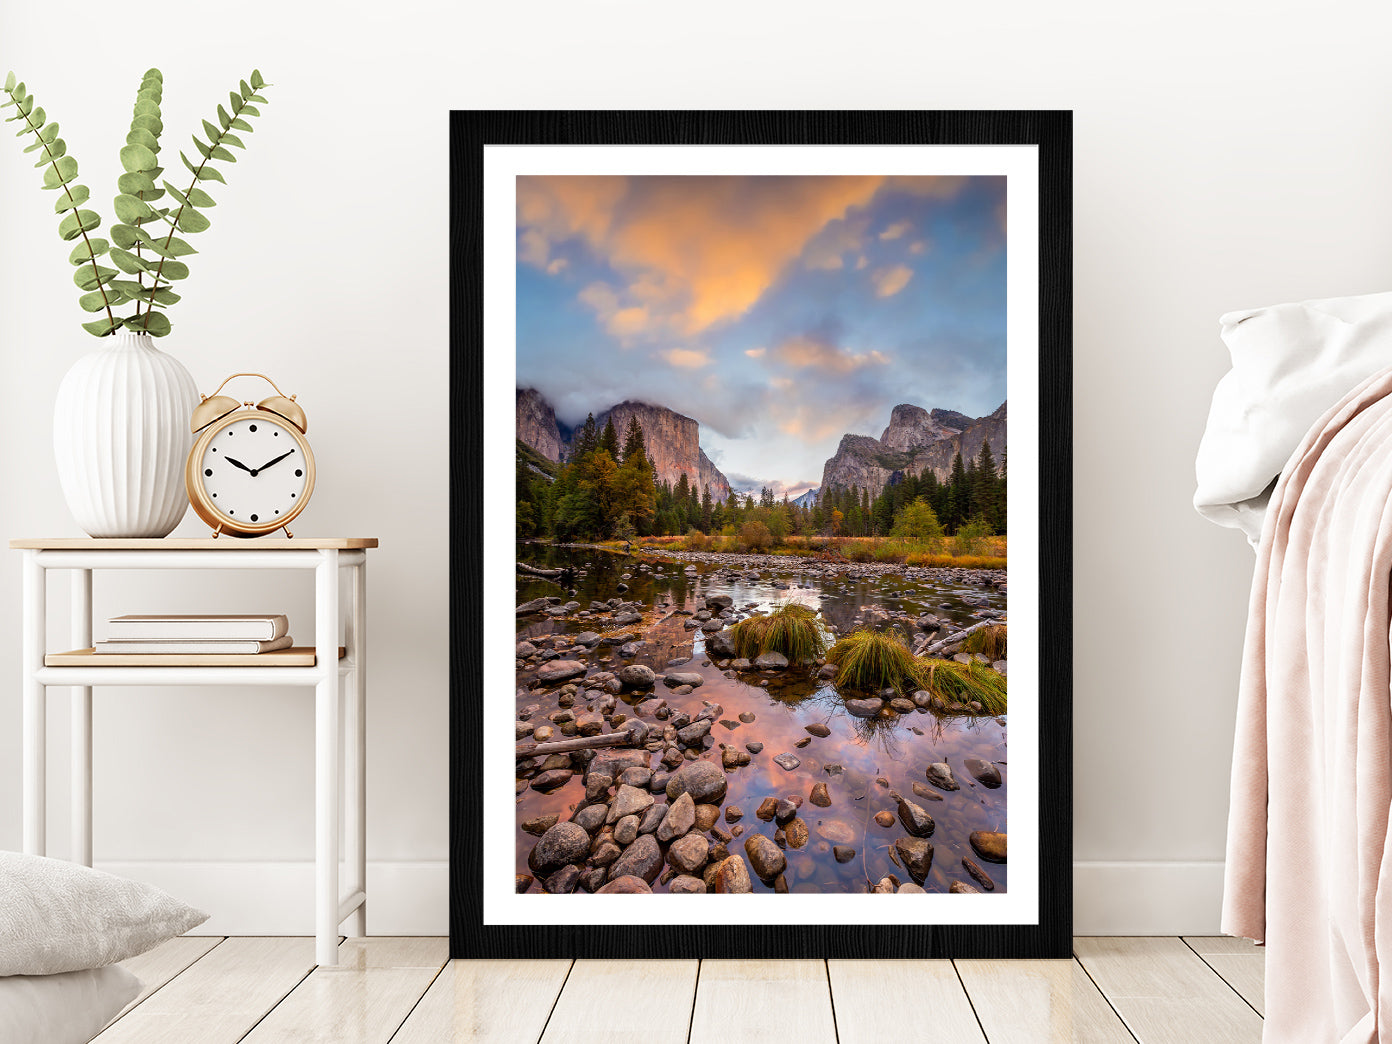 Landscape of Yosemite Park Autumn Glass Framed Wall Art, Ready to Hang Quality Print With White Border Black